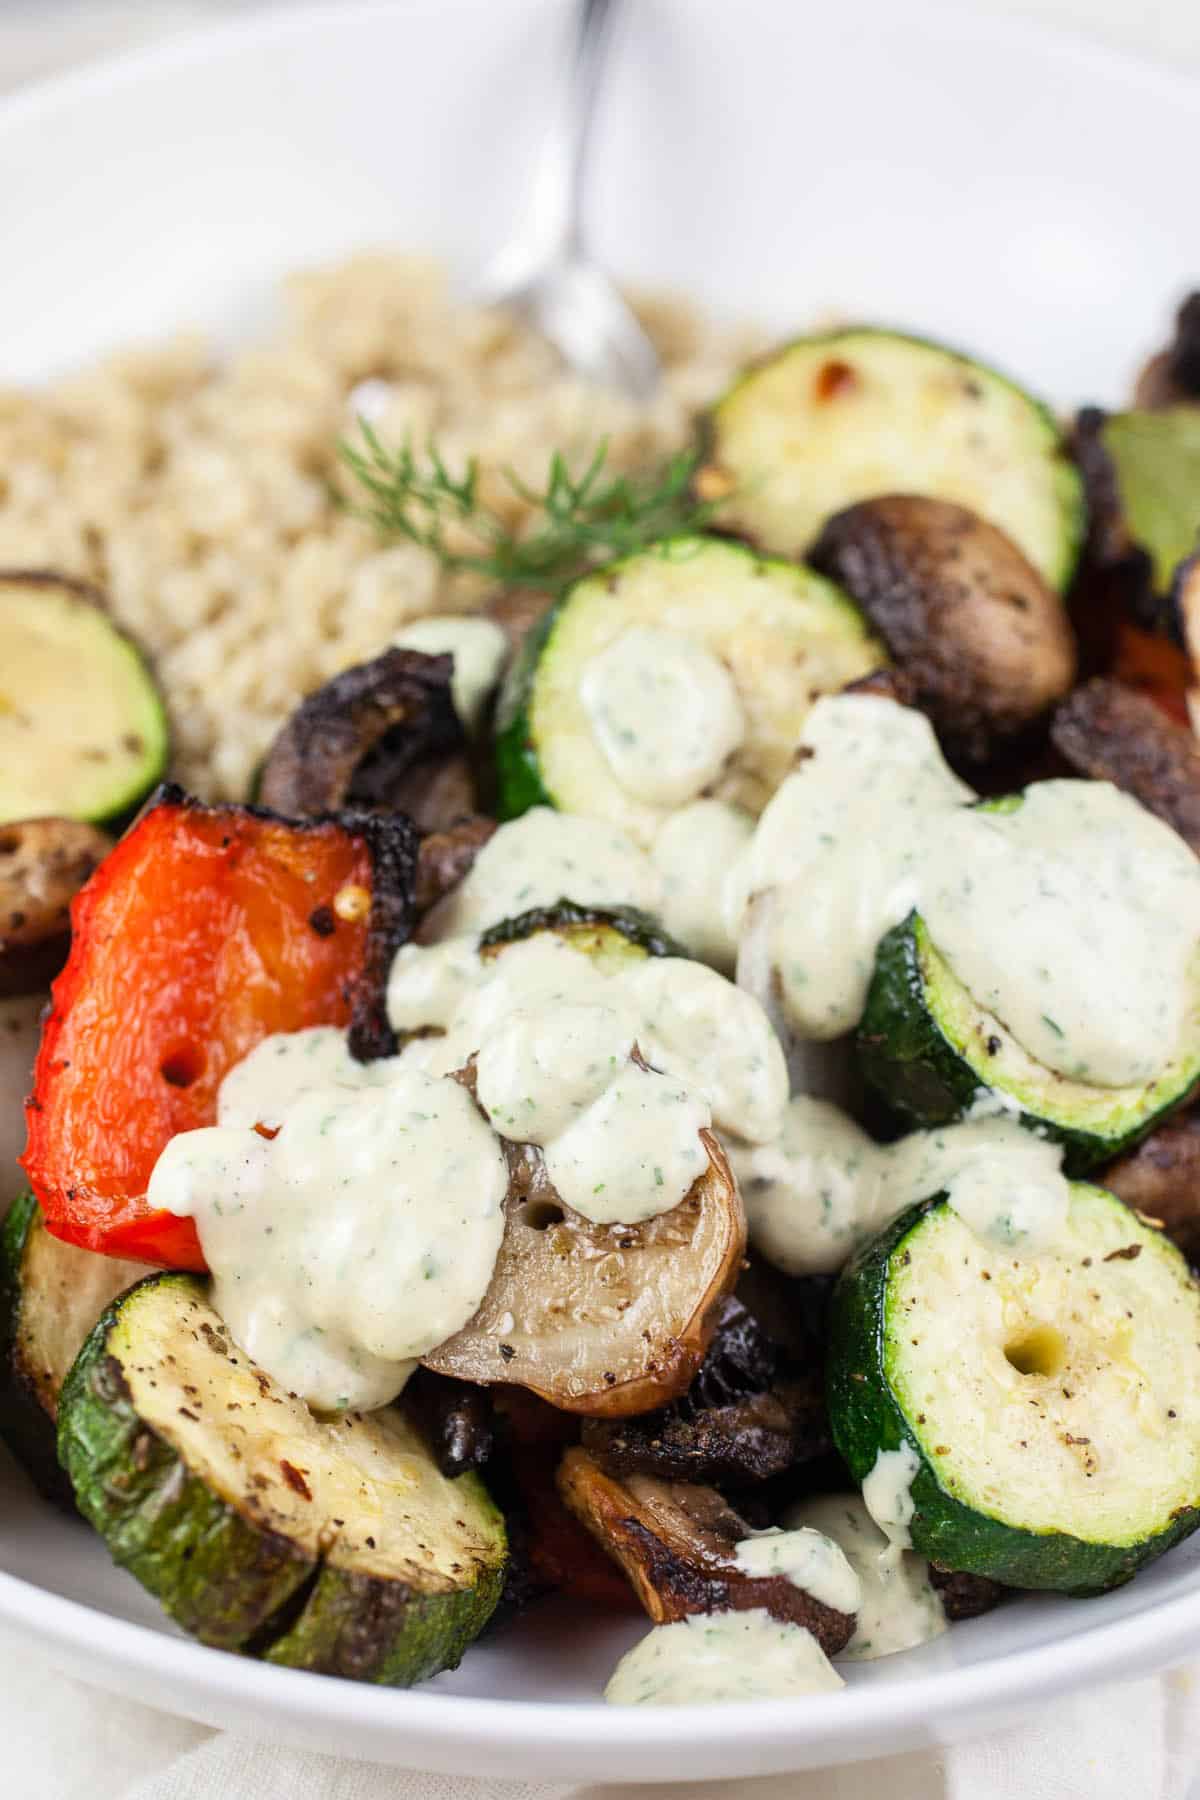 Tahini sauce on top of grilled vegetables and quinoa in white bowl.